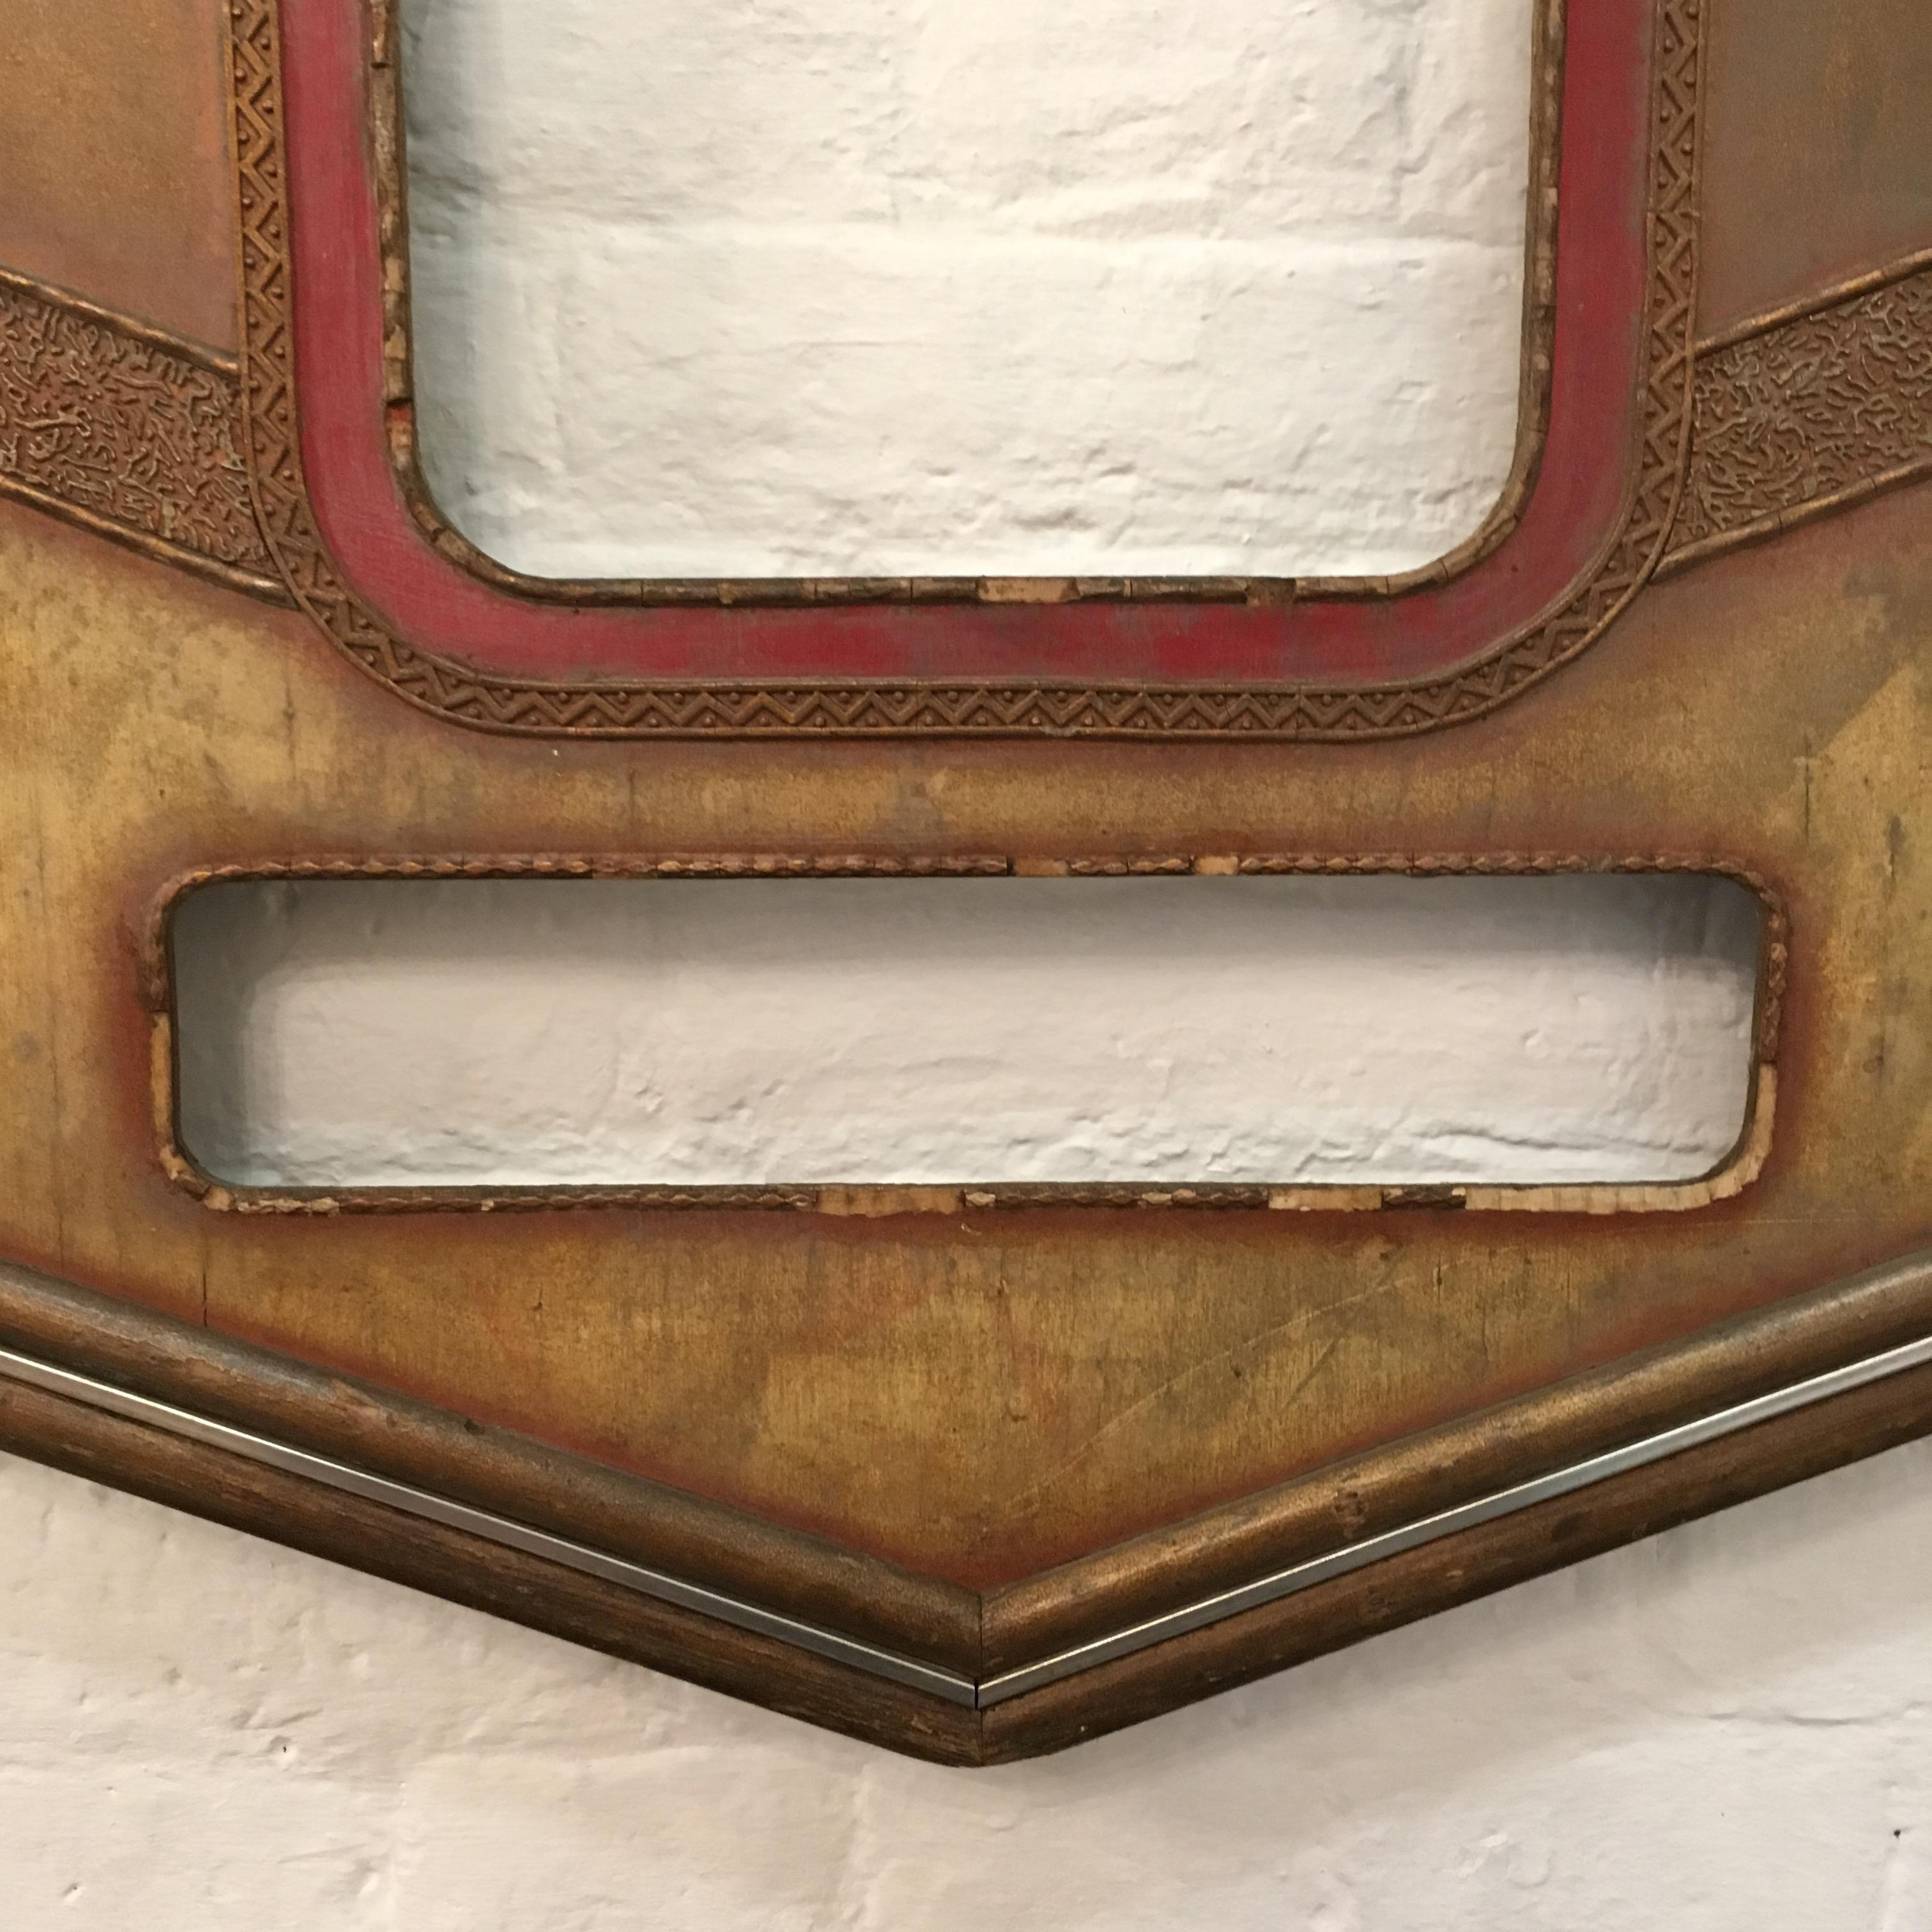 Hand-Crafted 1920s Art Deco Theatre/Cinema Poster Frame